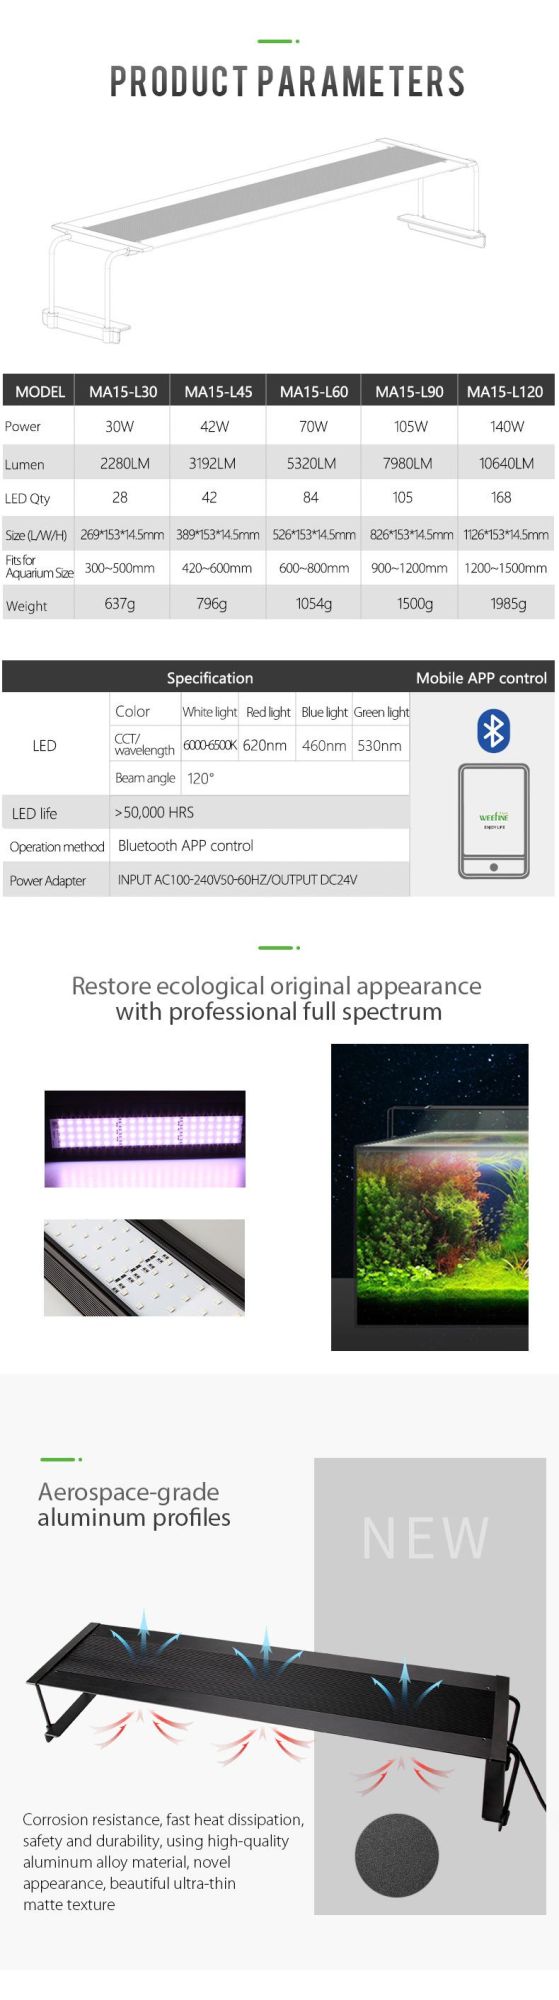 Programmable LED Aquarium Light for Coral Reef with Sunset and Sunrise Mode (MA15)